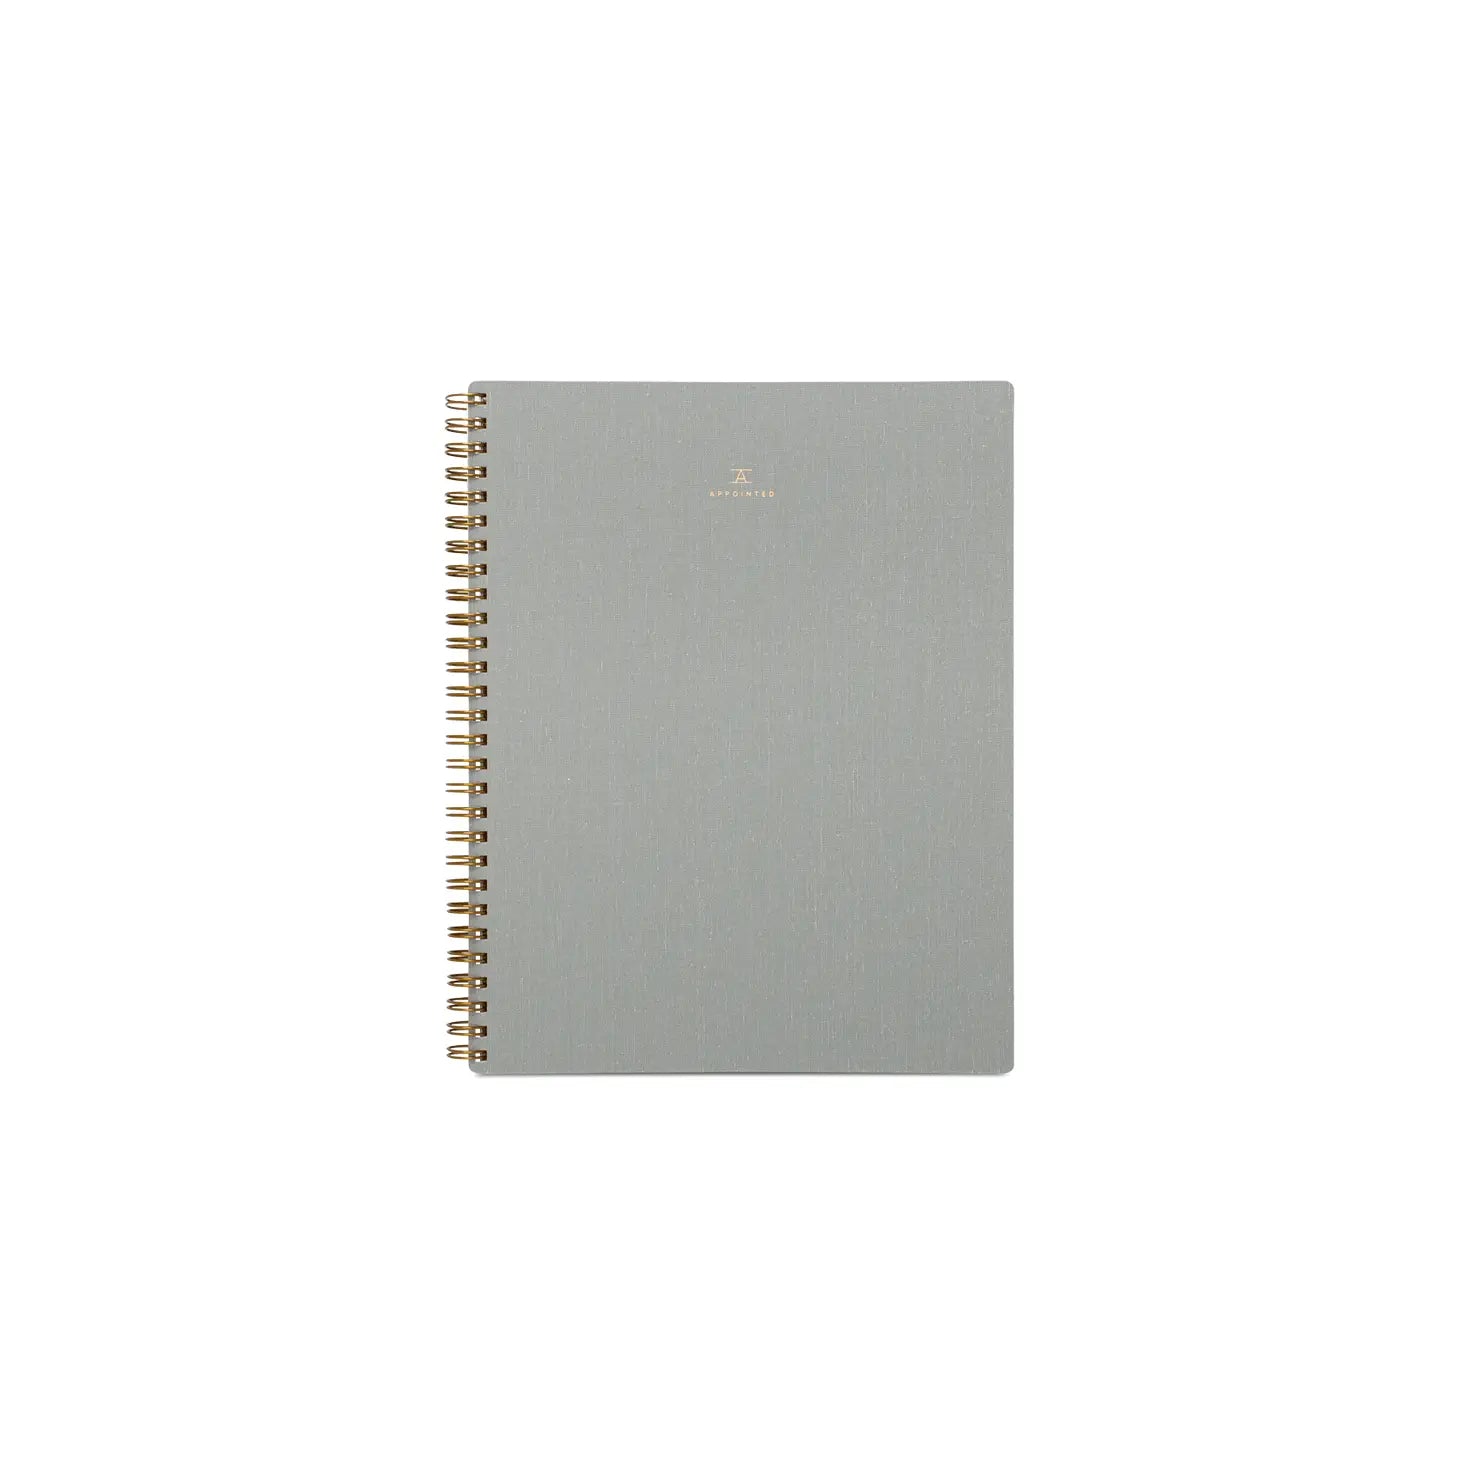 Appointed Coiled Workbook Lined - Dove Grey